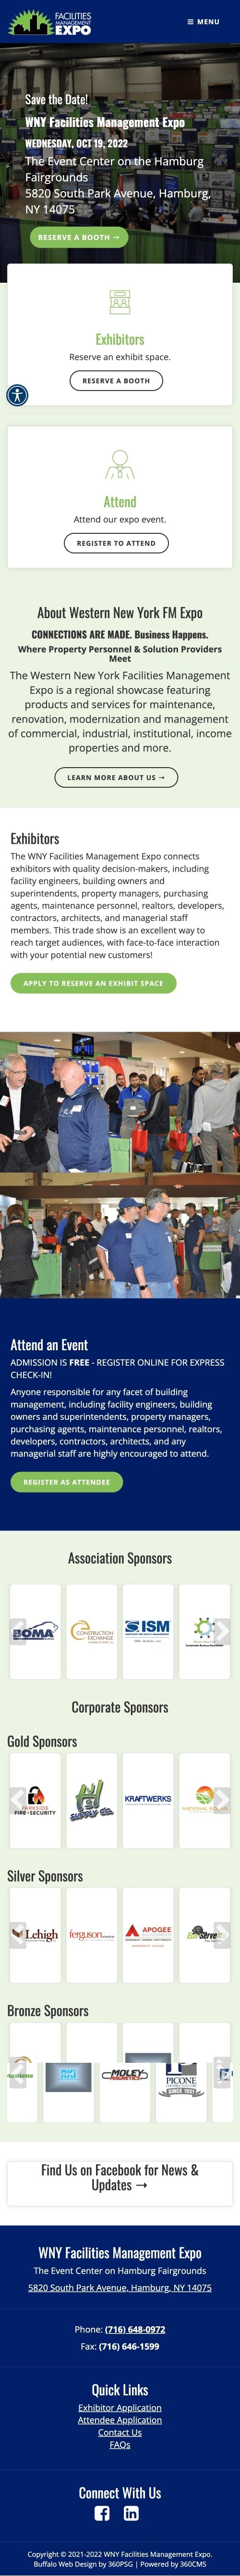 WNY Facilities Management Expo Website - Mobile